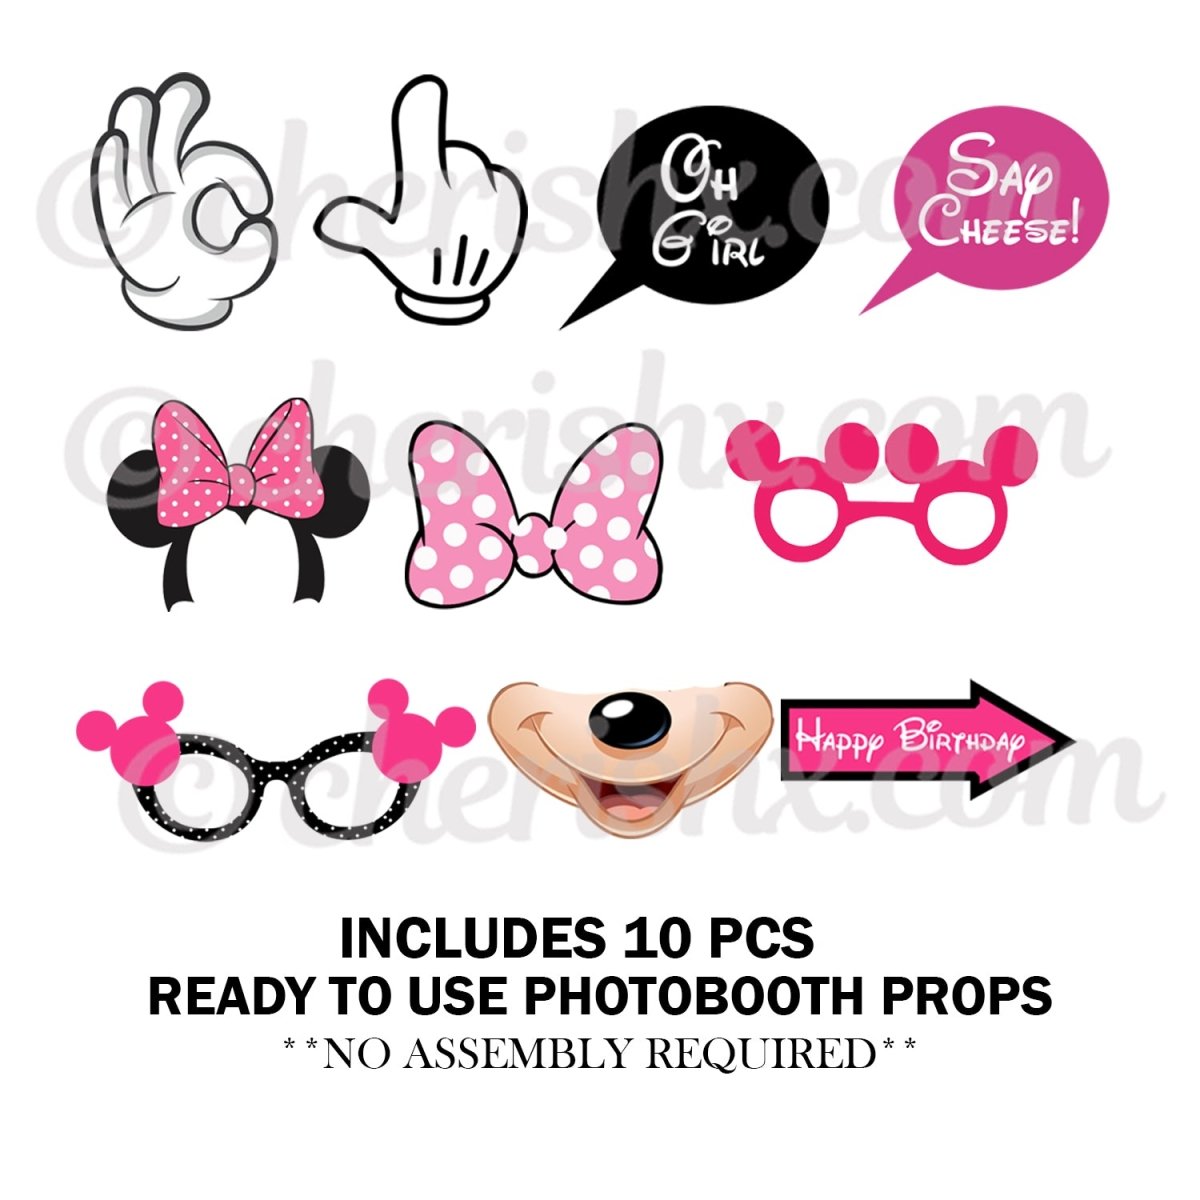 Minnie Photo Booth Party Props freeshipping - CherishX Partystore